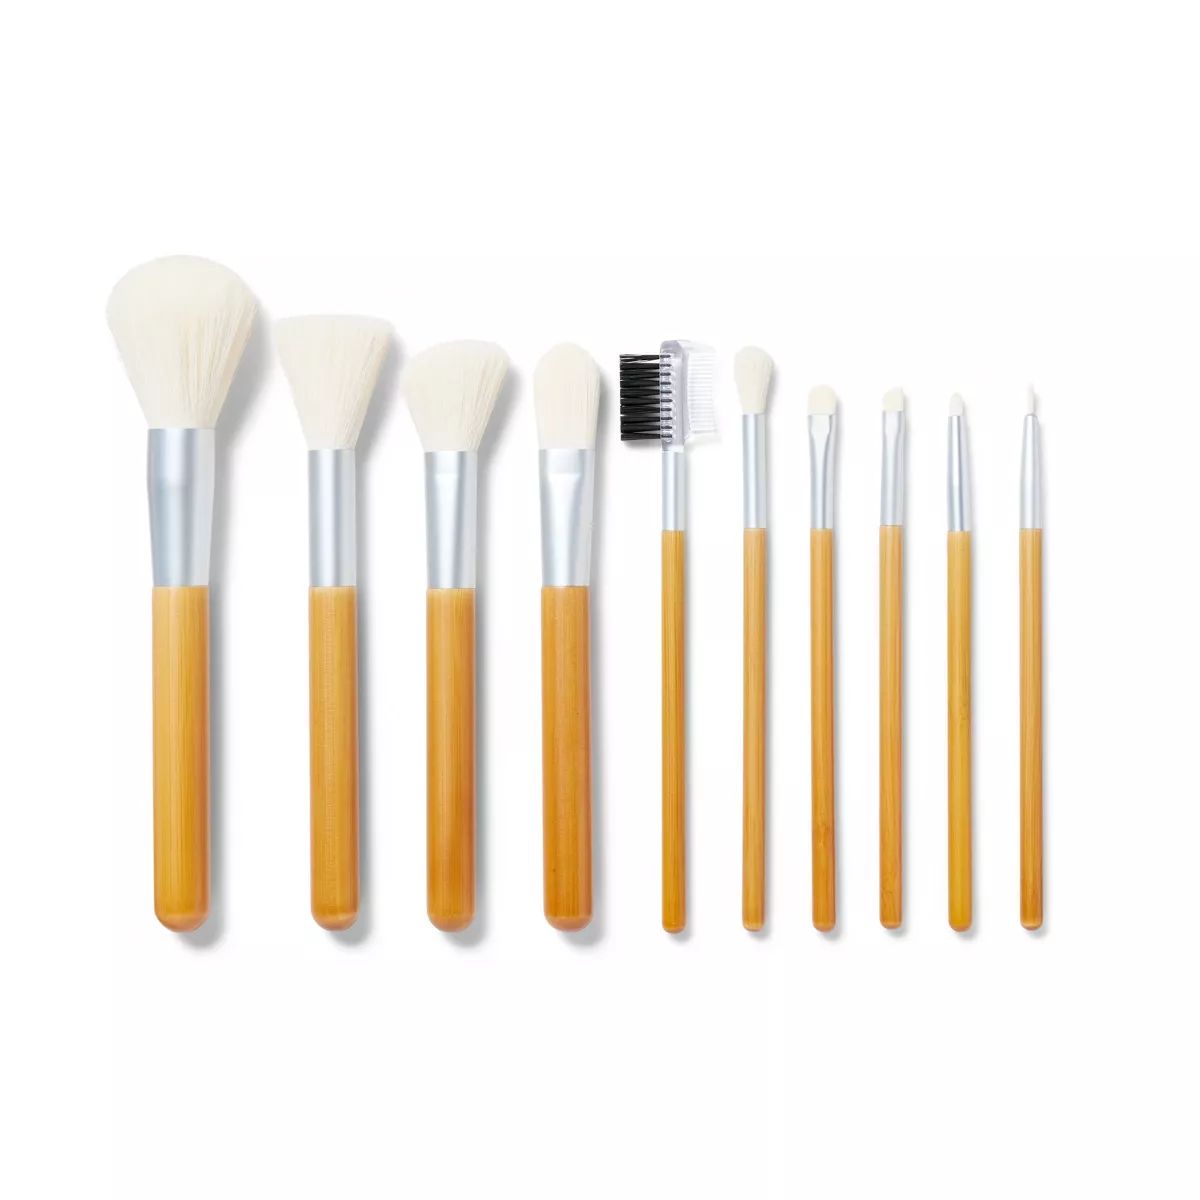 The Perfect 10 Cosmetic Brush Gift Set - 10ct | Target